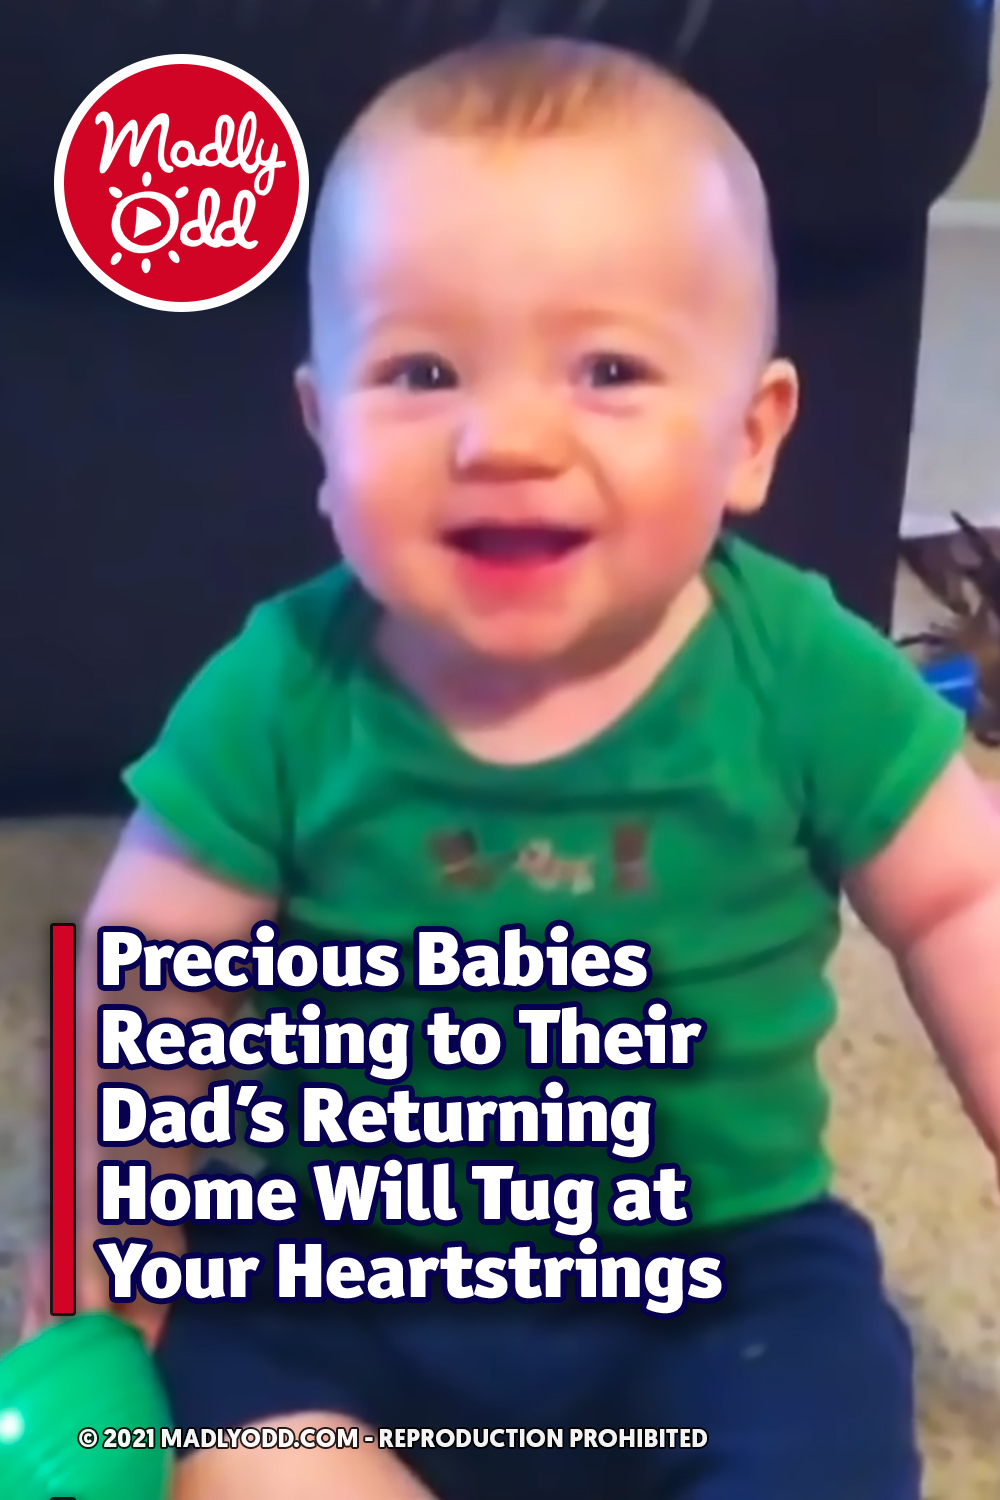 Precious Babies Reacting to Their Dad’s Returning Home Will Tug at Your Heartstrings